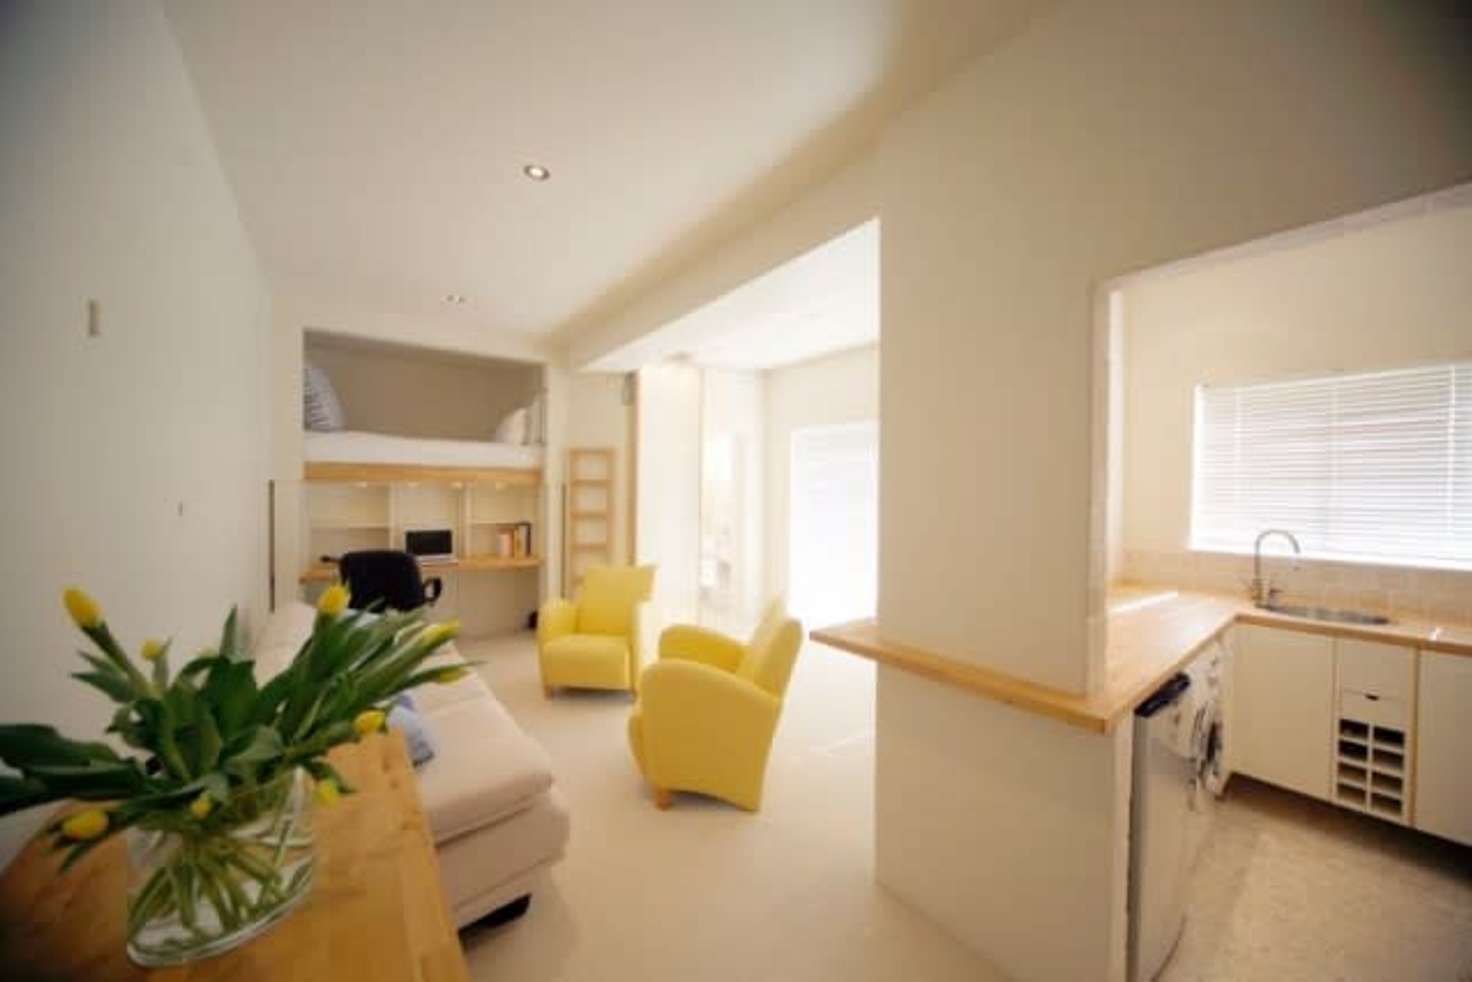 Main view of Homely studio listing, 5/15 Eric Street, Cottesloe WA 6011